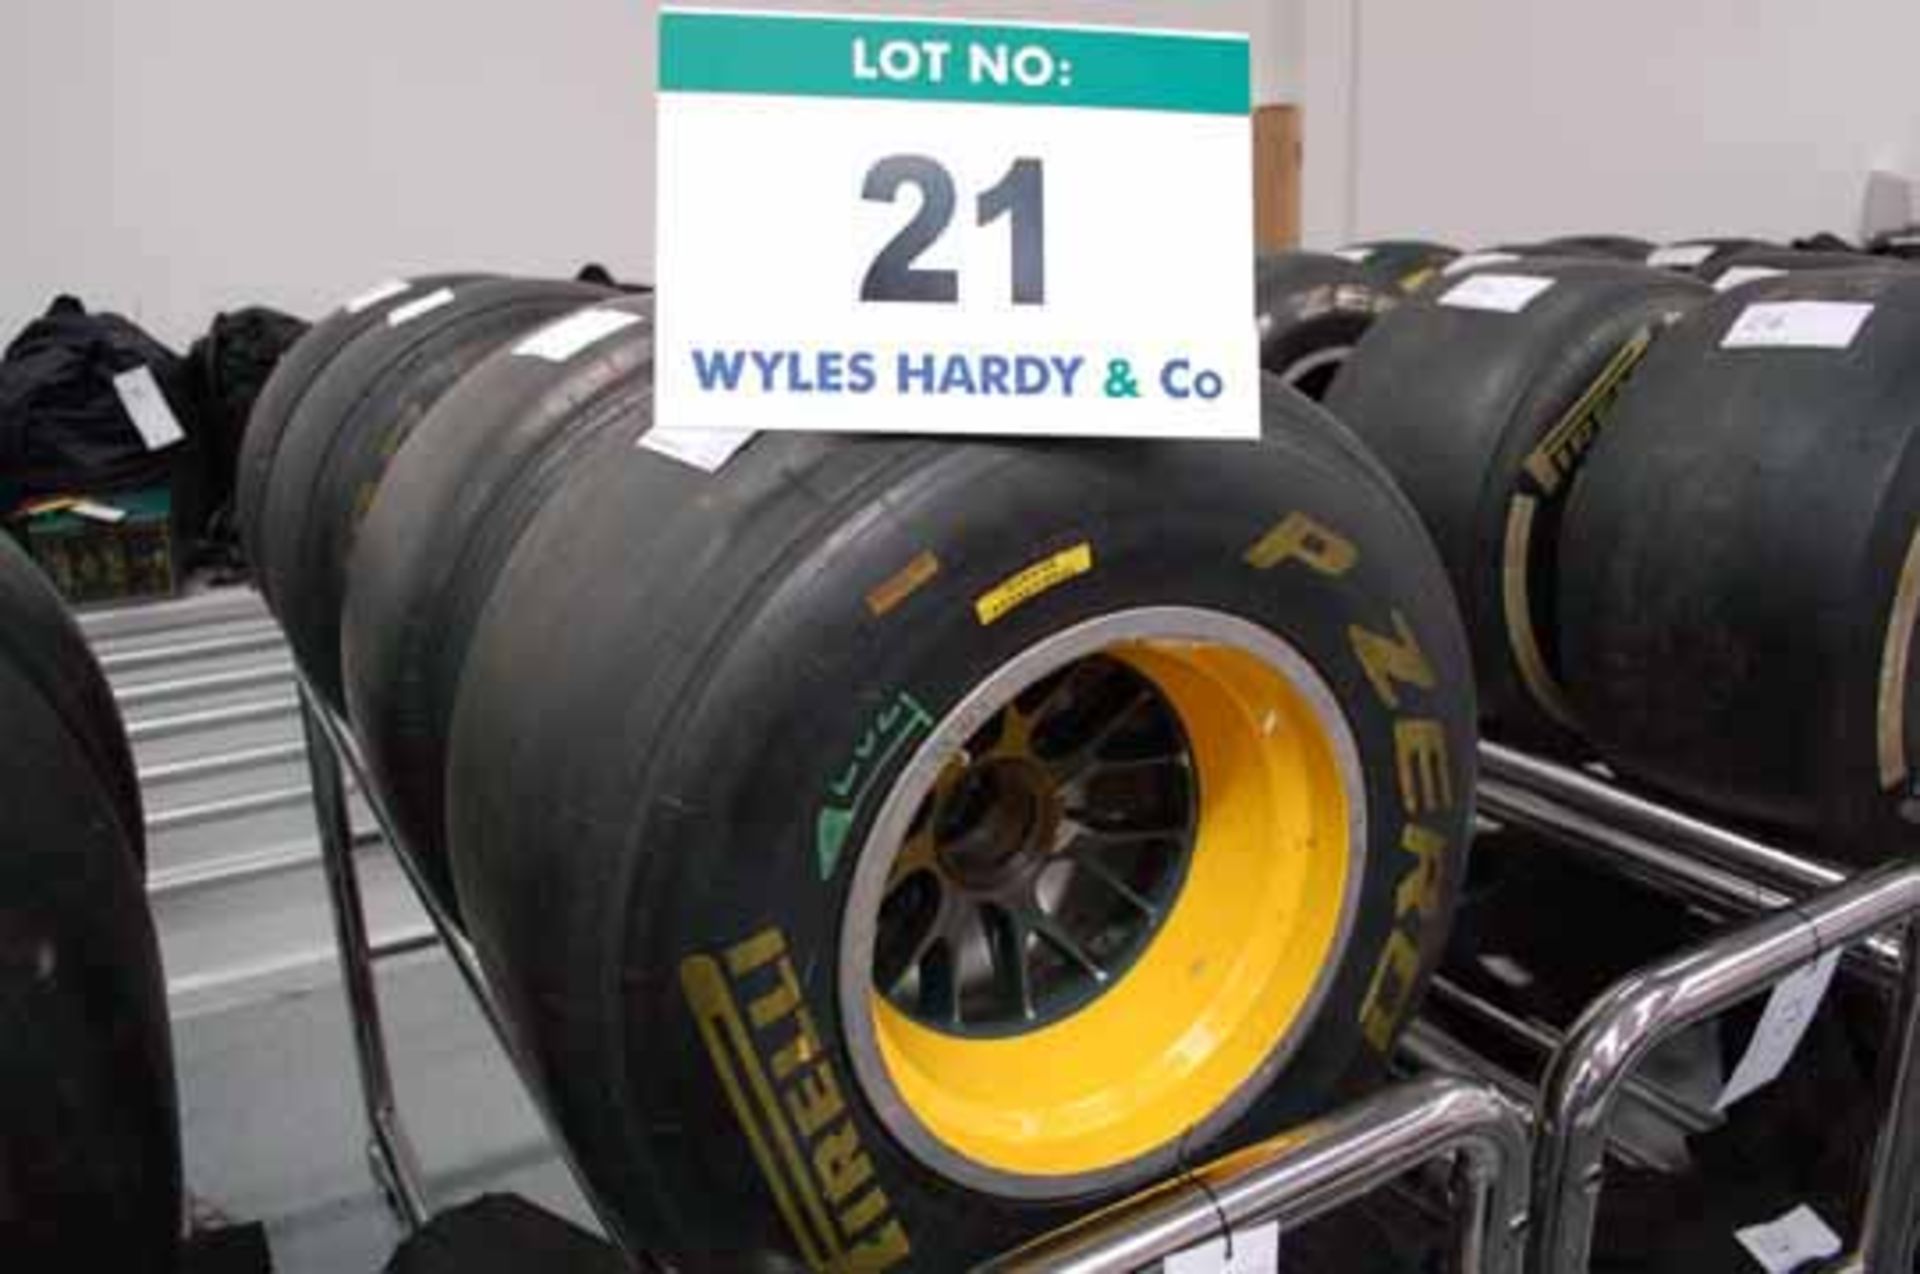 Two 2011 Show Front Wheel Rims mounted with PIRELLI Slick Show Tyres (One Front & One Rear)